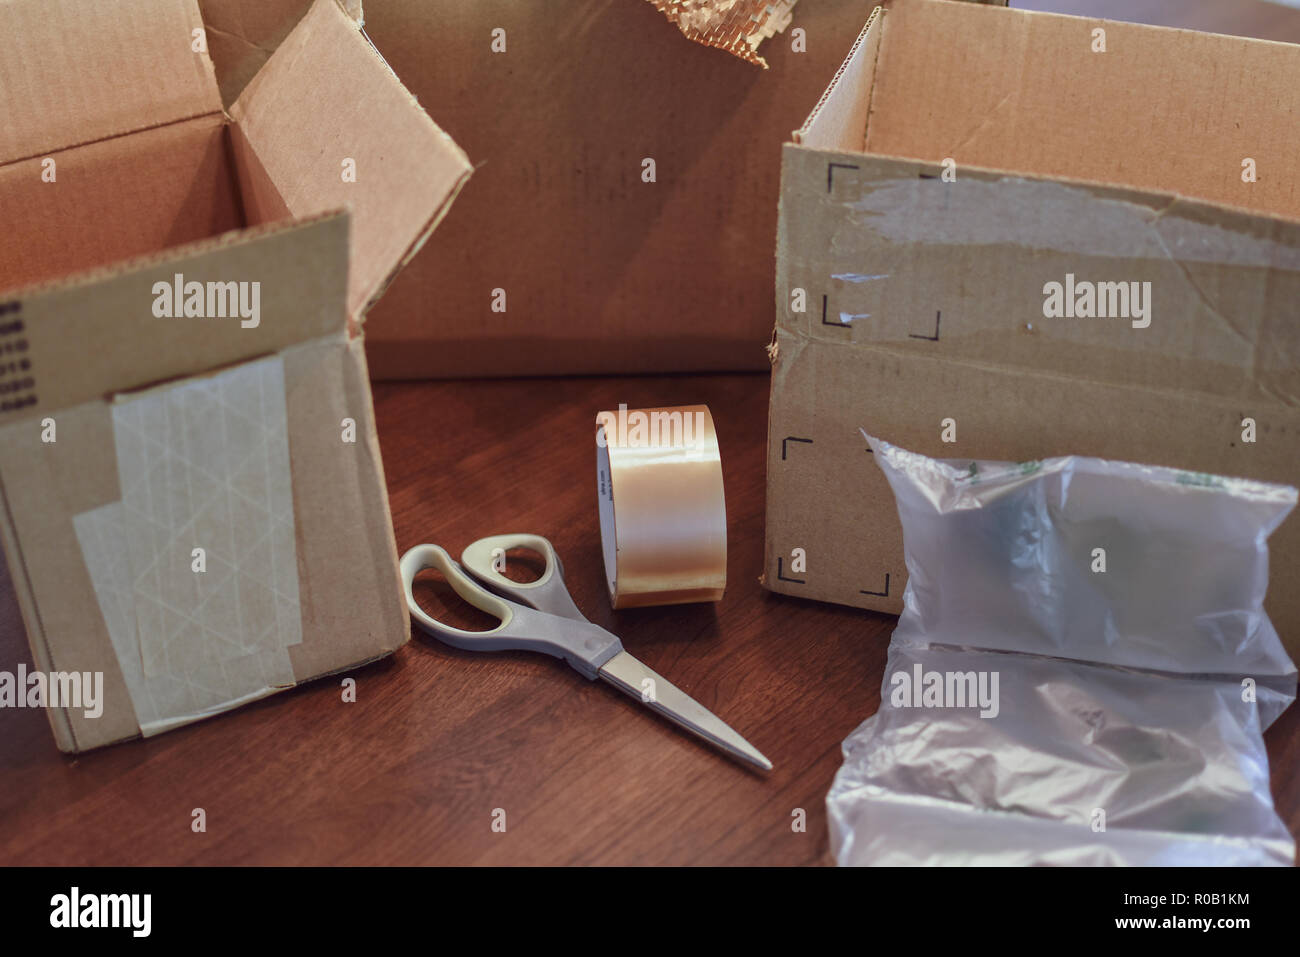 Packaging materials and supplies on a table Stock Photo